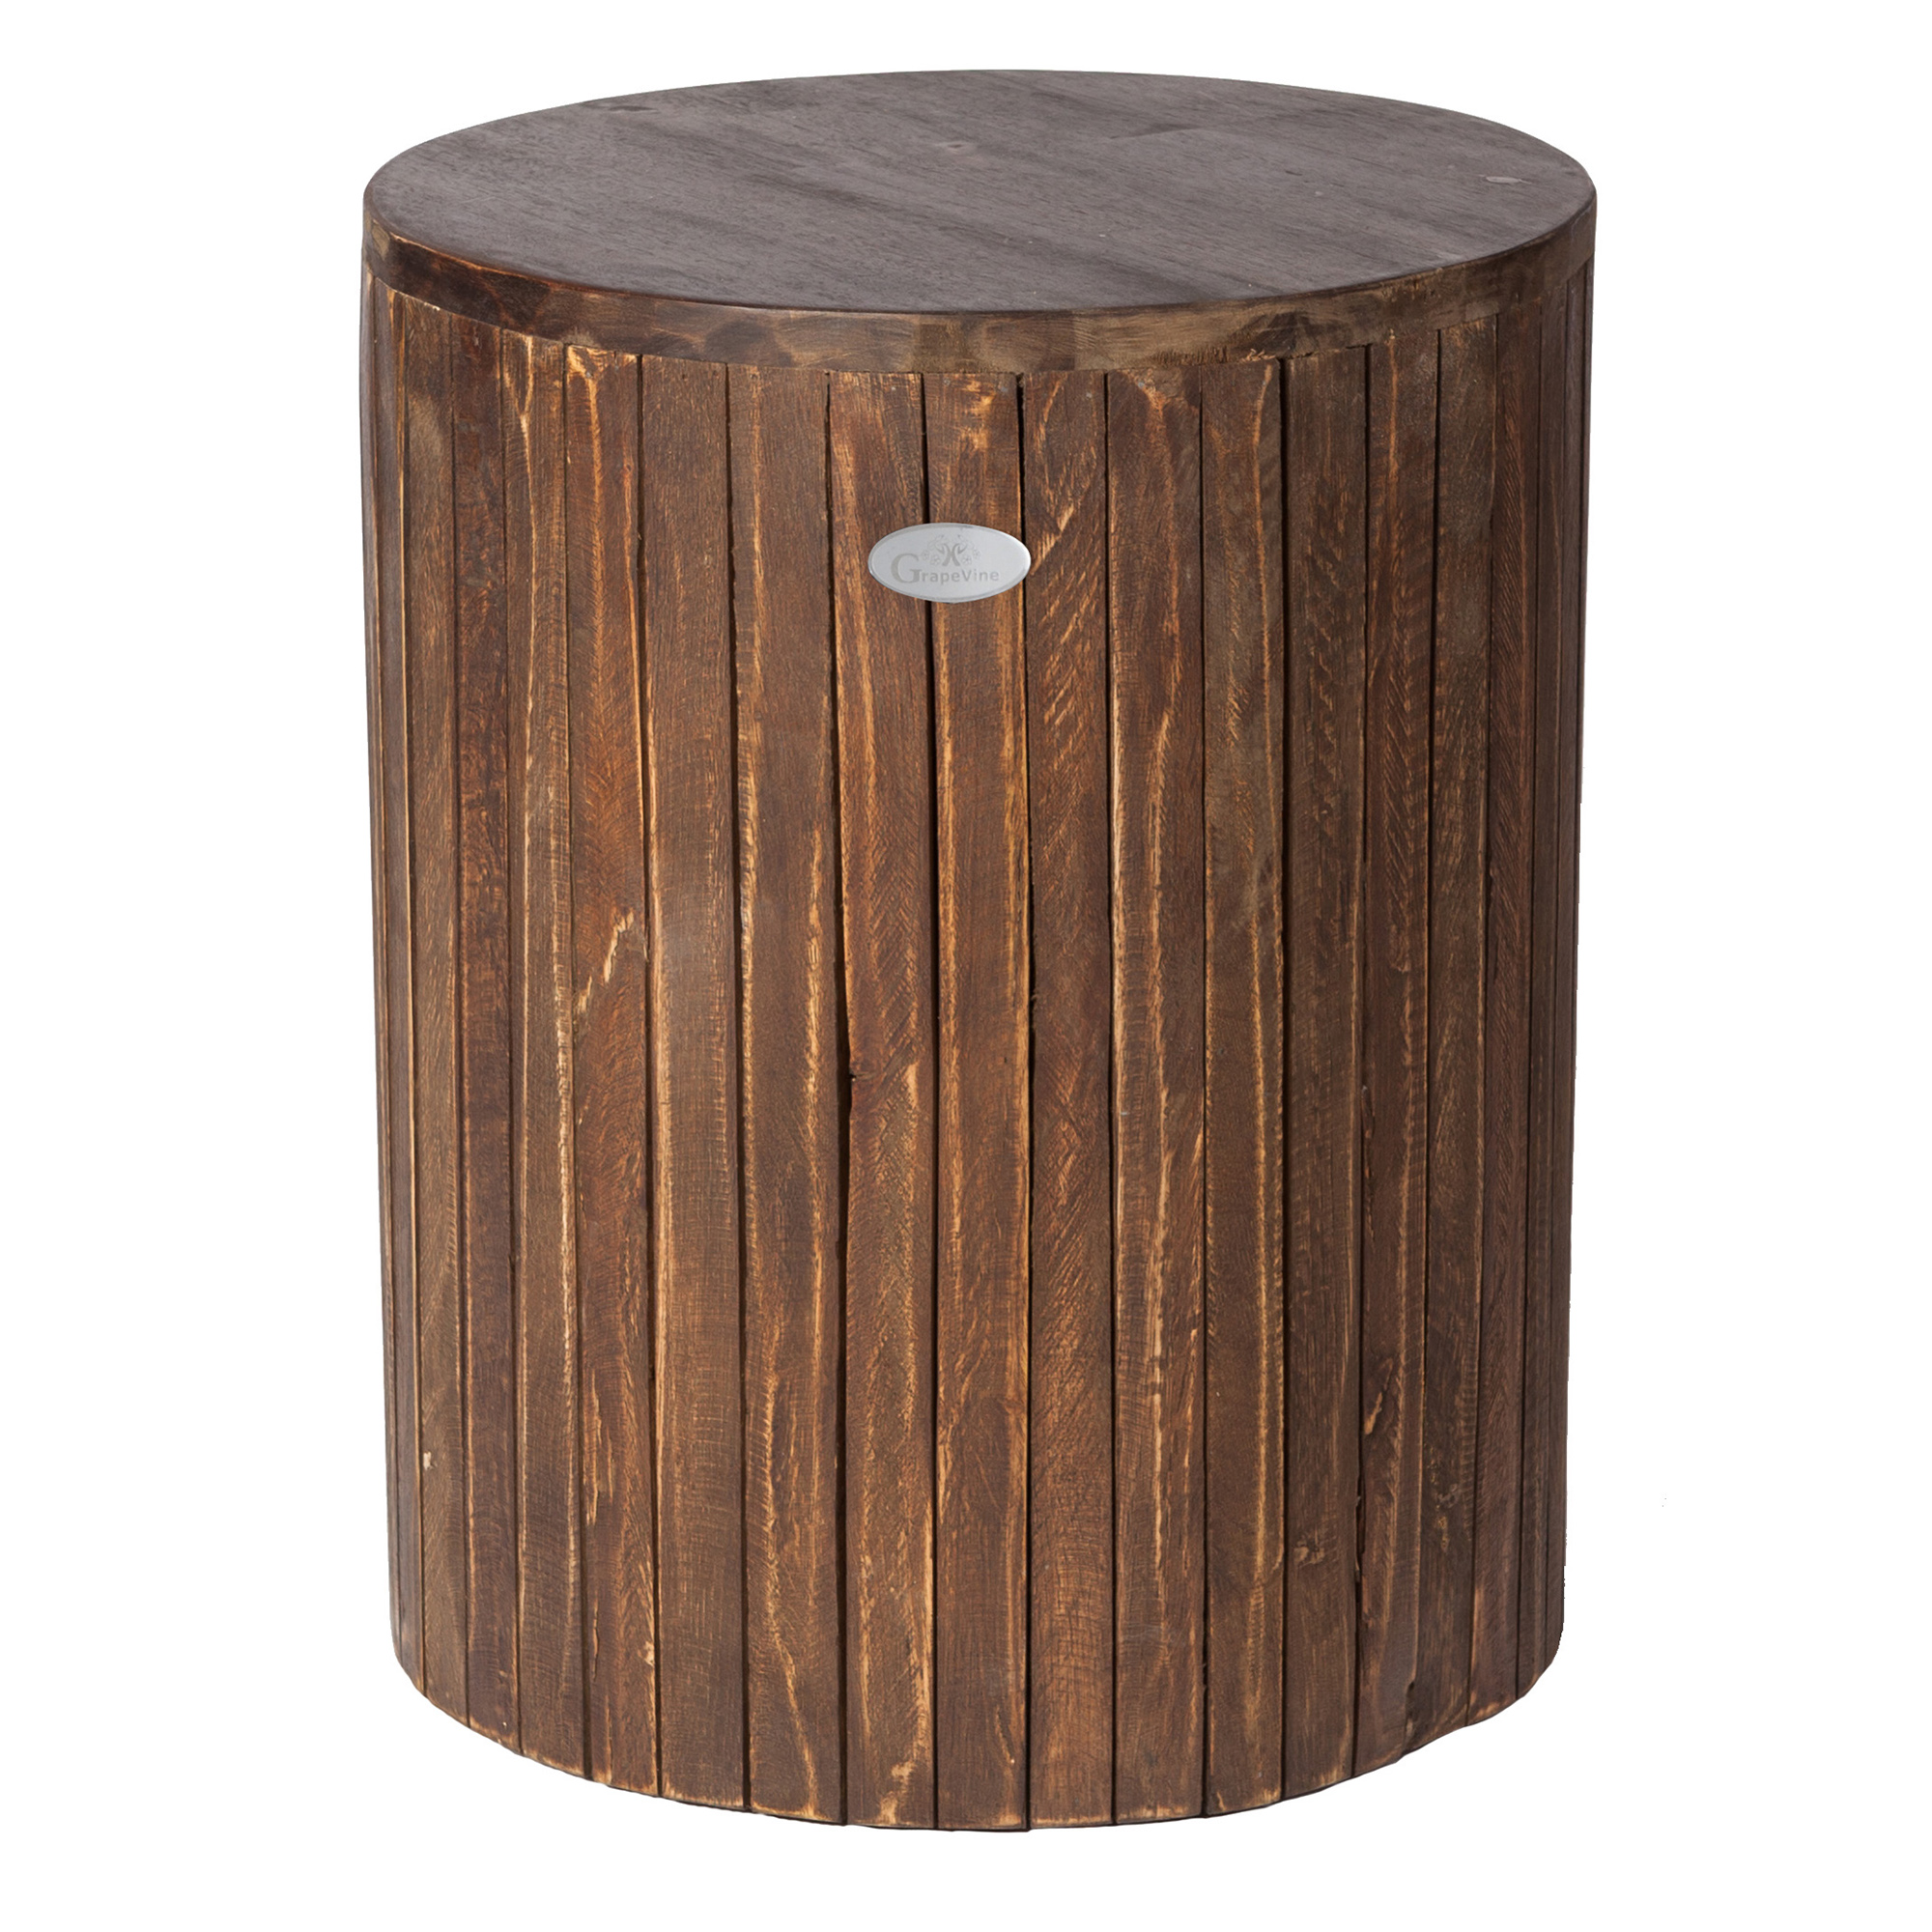 Michael Round Recycled Wood Stool/Plant Stand